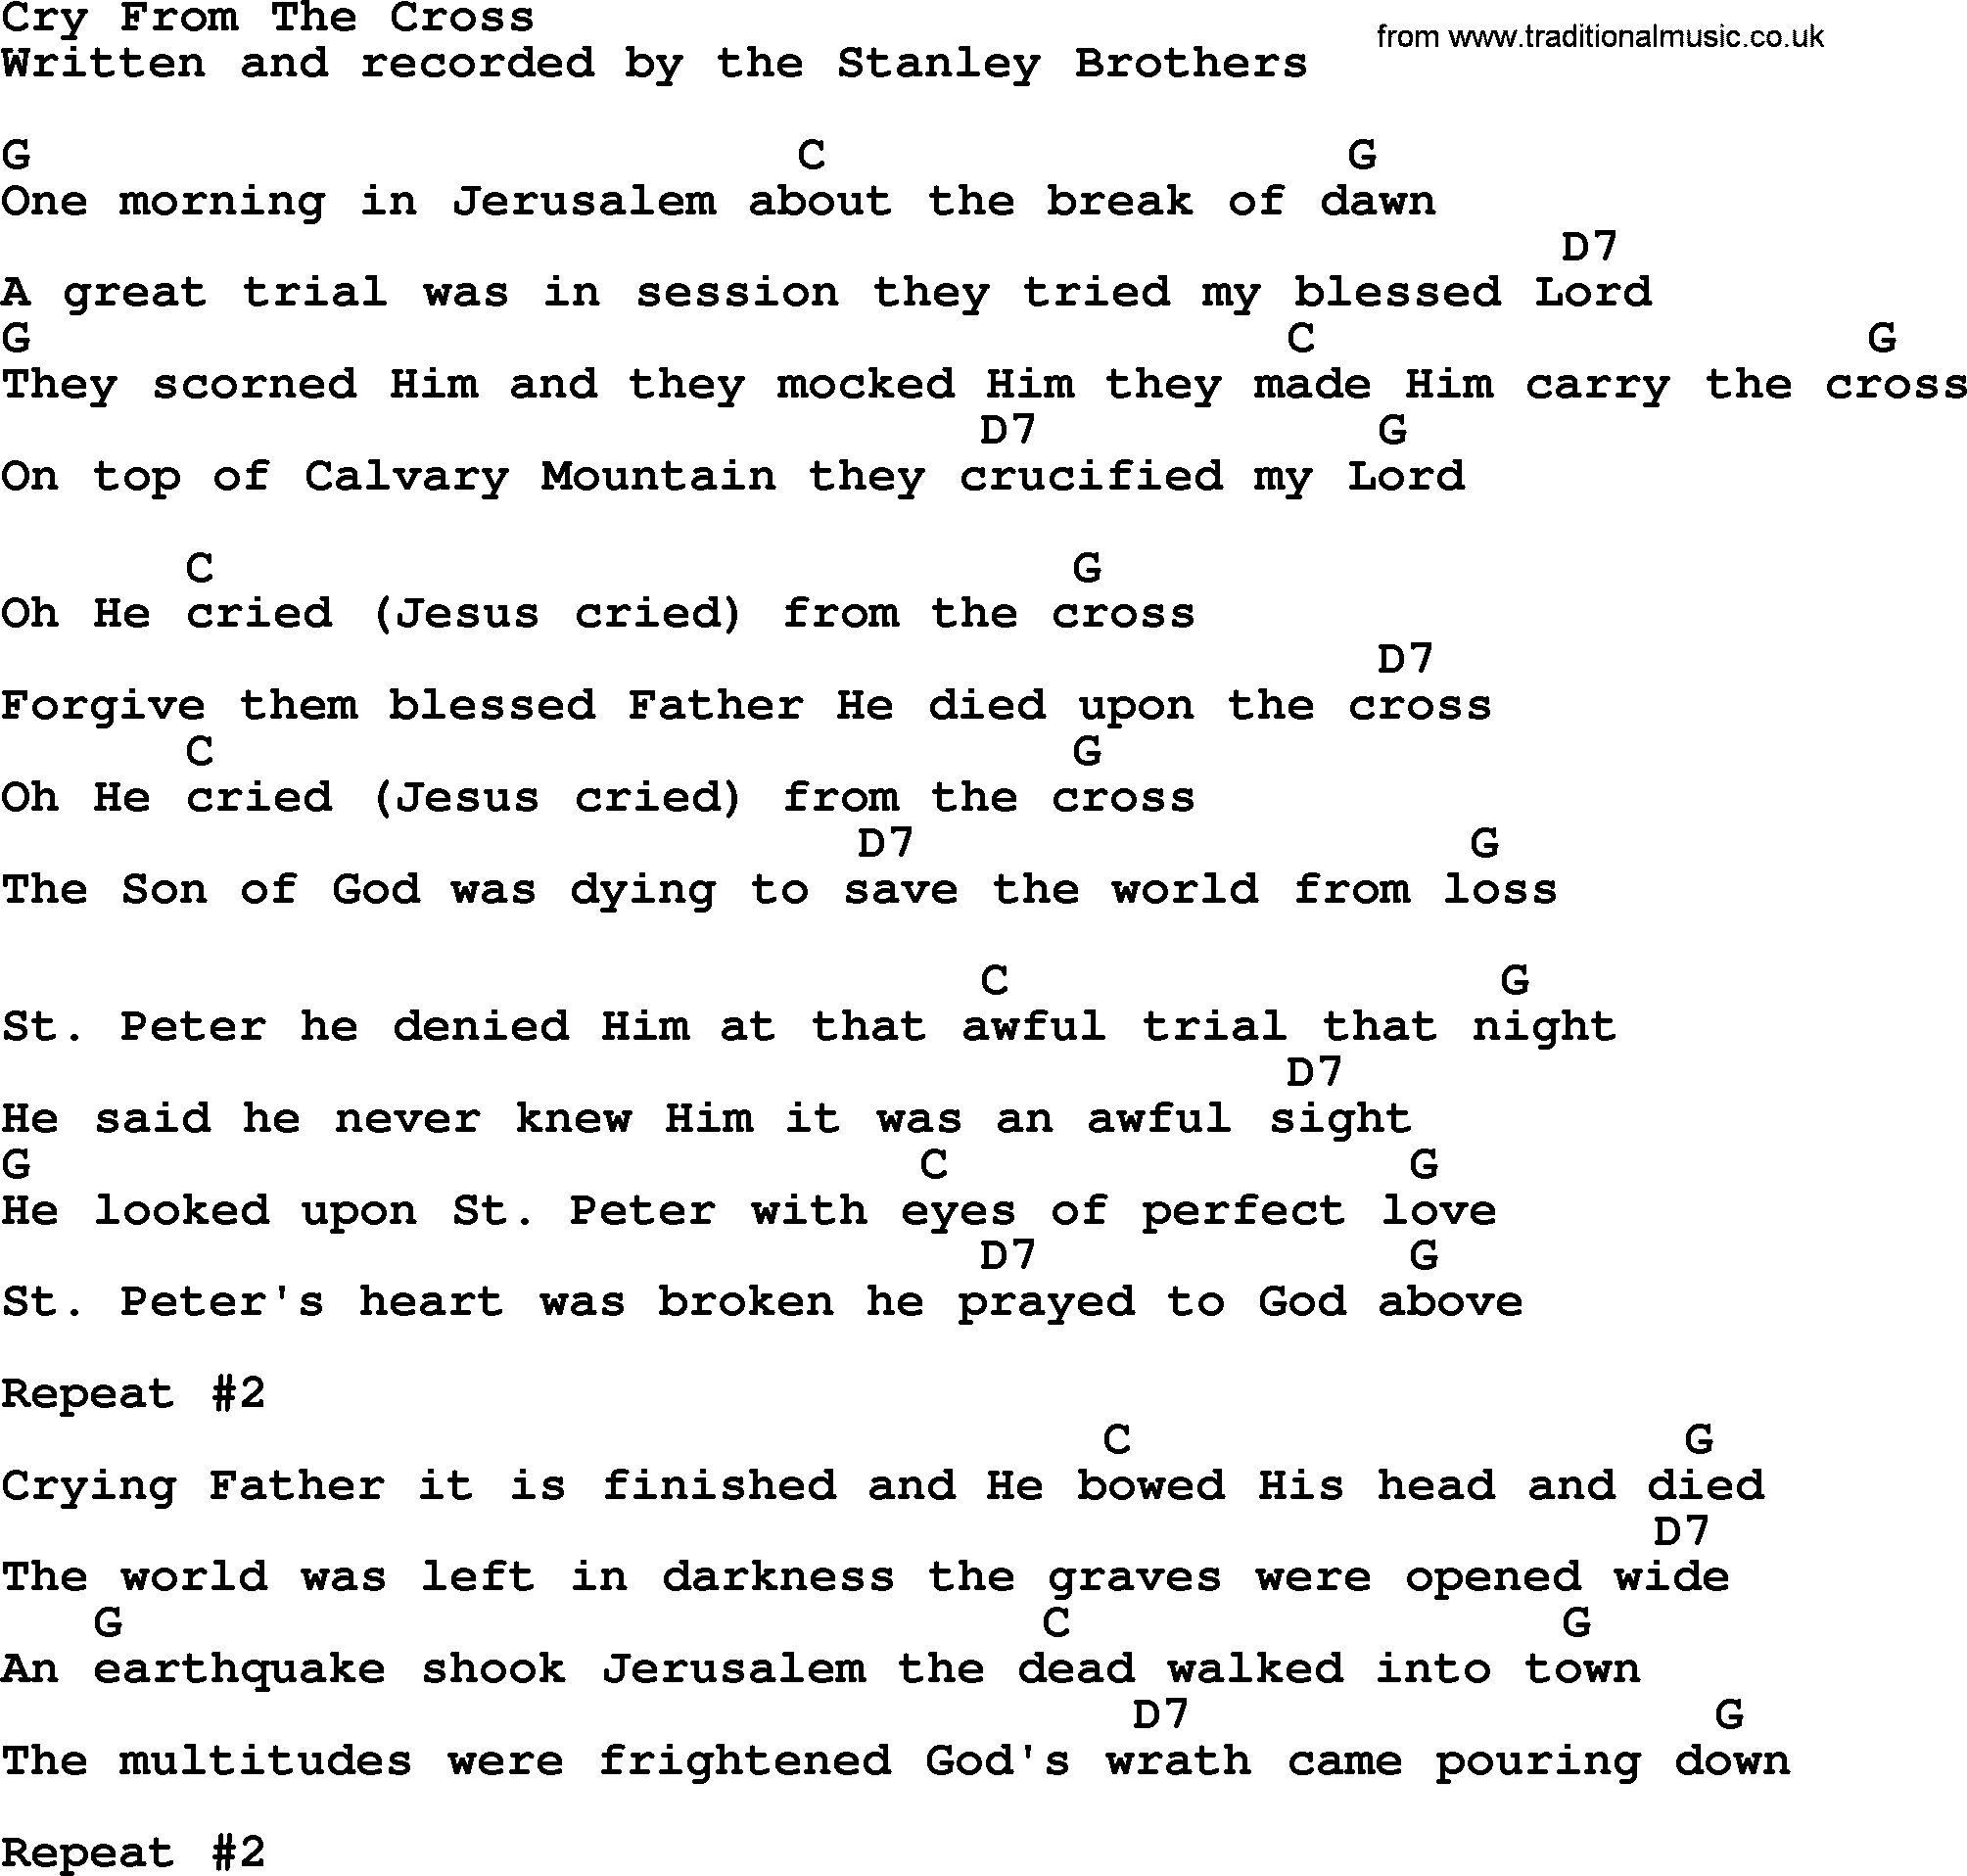 Bluegrass song: Cry From The Cross, lyrics and chords